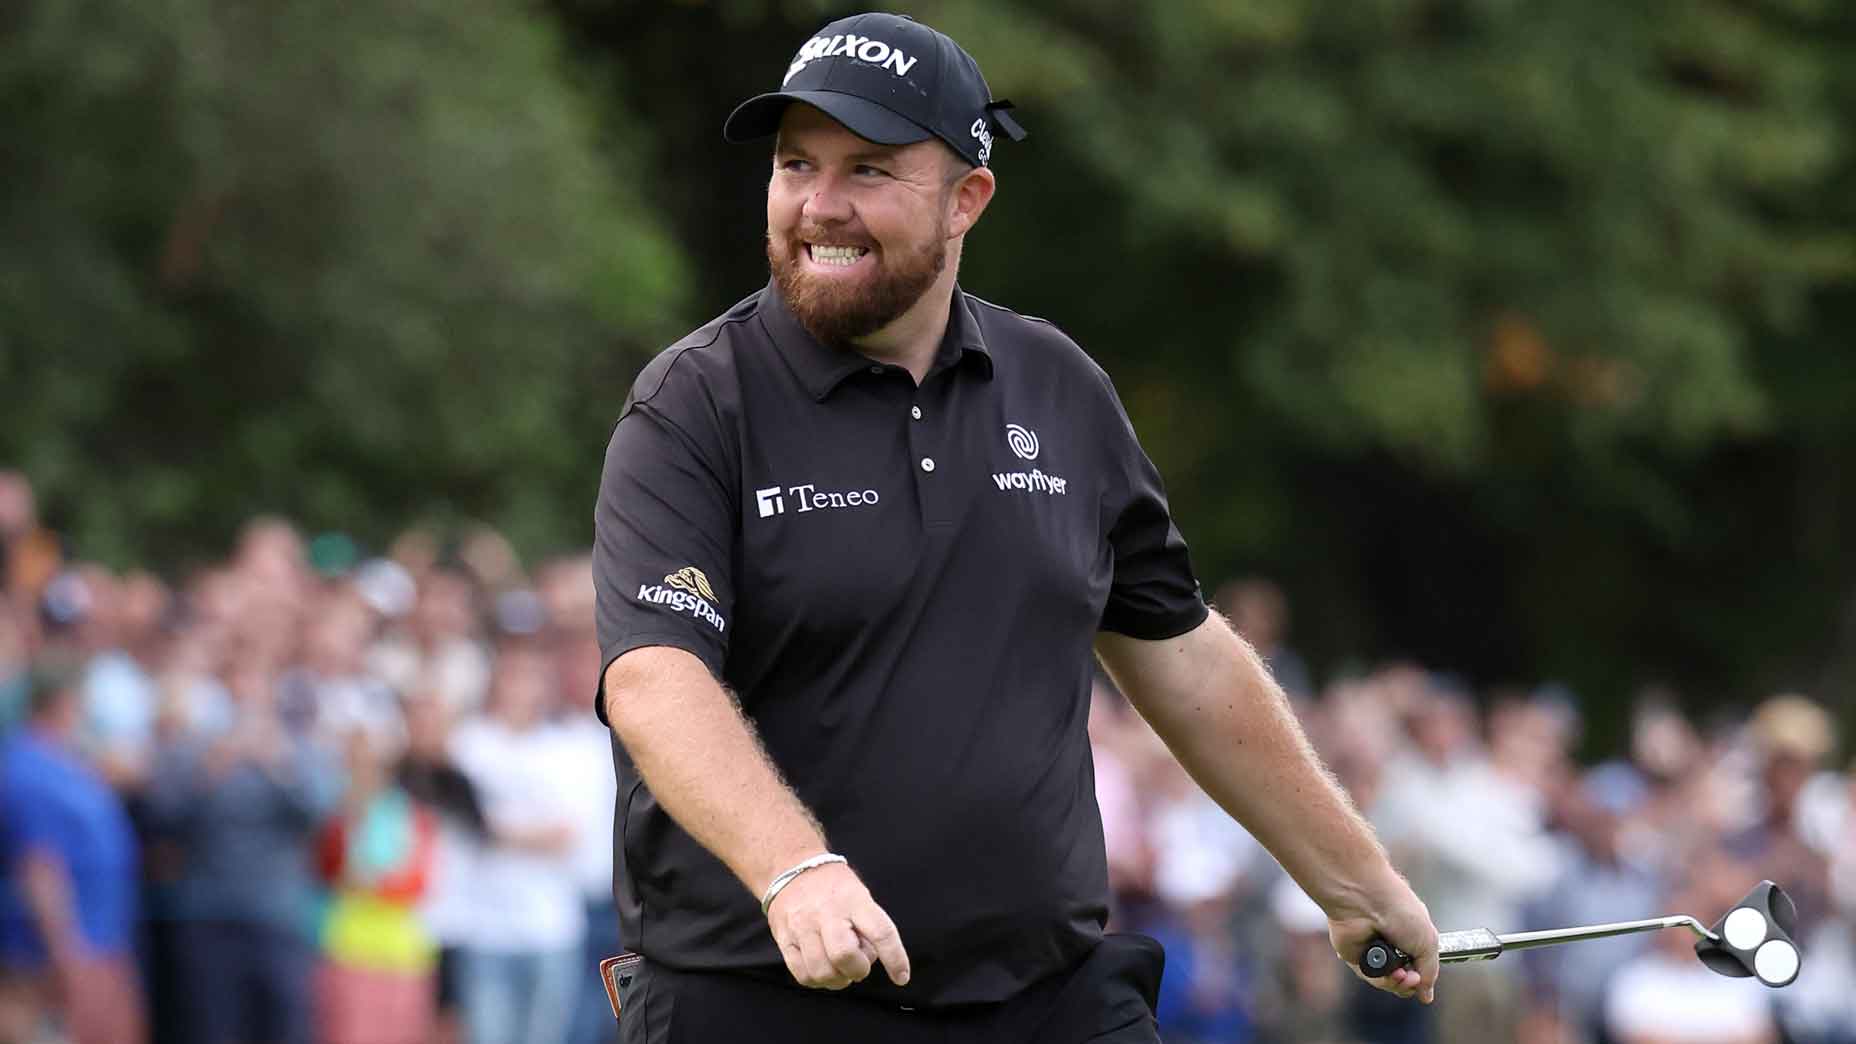 Shane Lowry wins the BMW PGA to cap a wild week at Wentworth